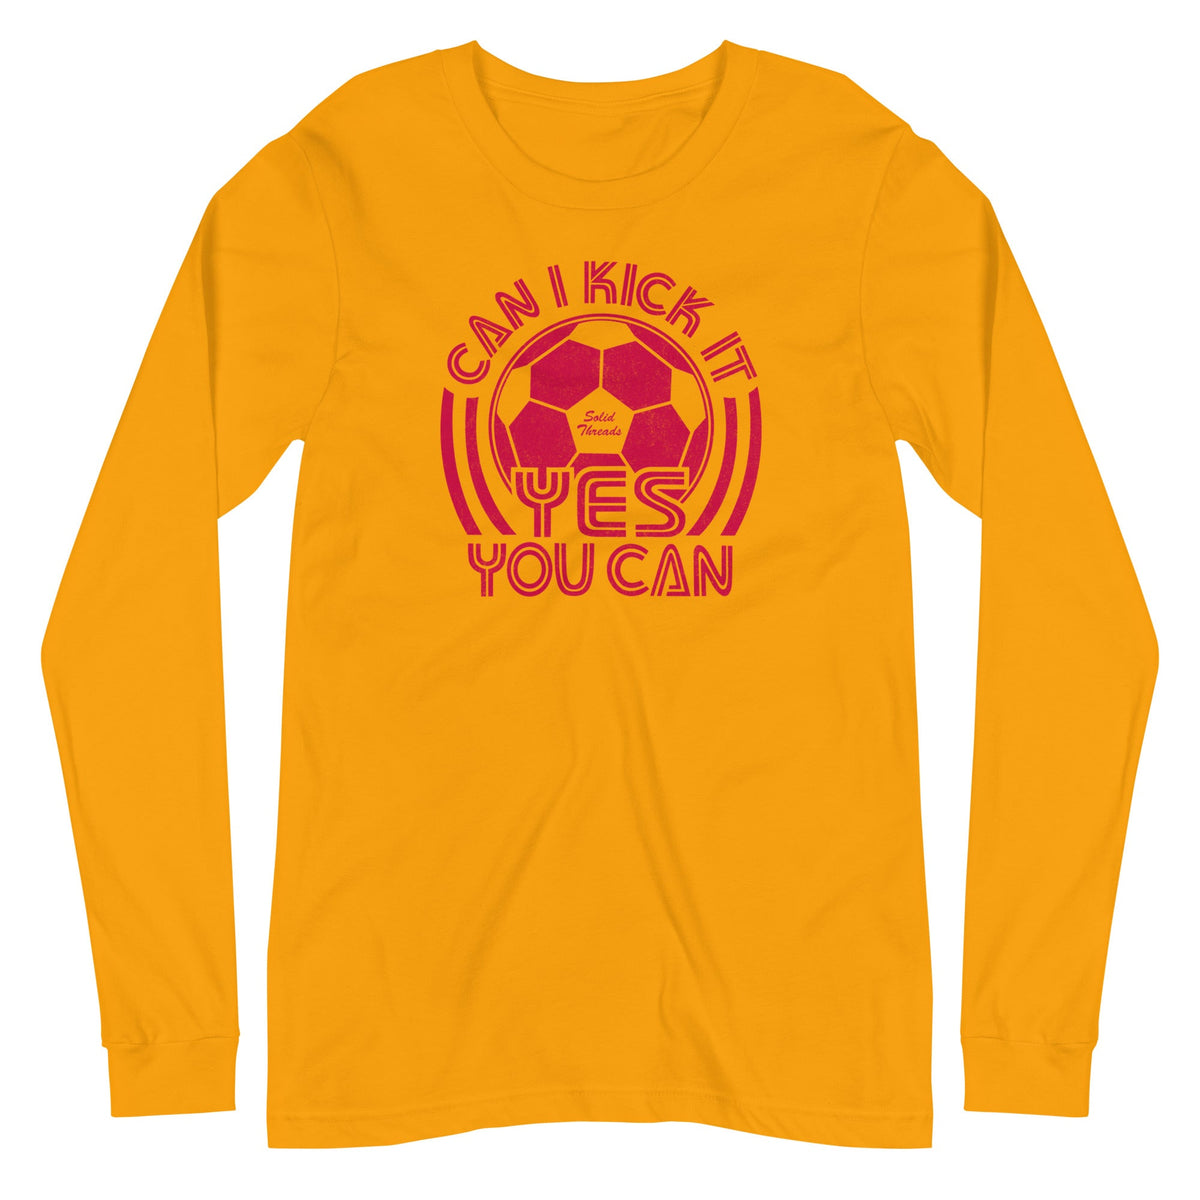 Unisex Can I Kick It, Yes You Can Long Sleeve Funny Graphic Tee | Vintage Soccer Gold T shirt | Solid Threads